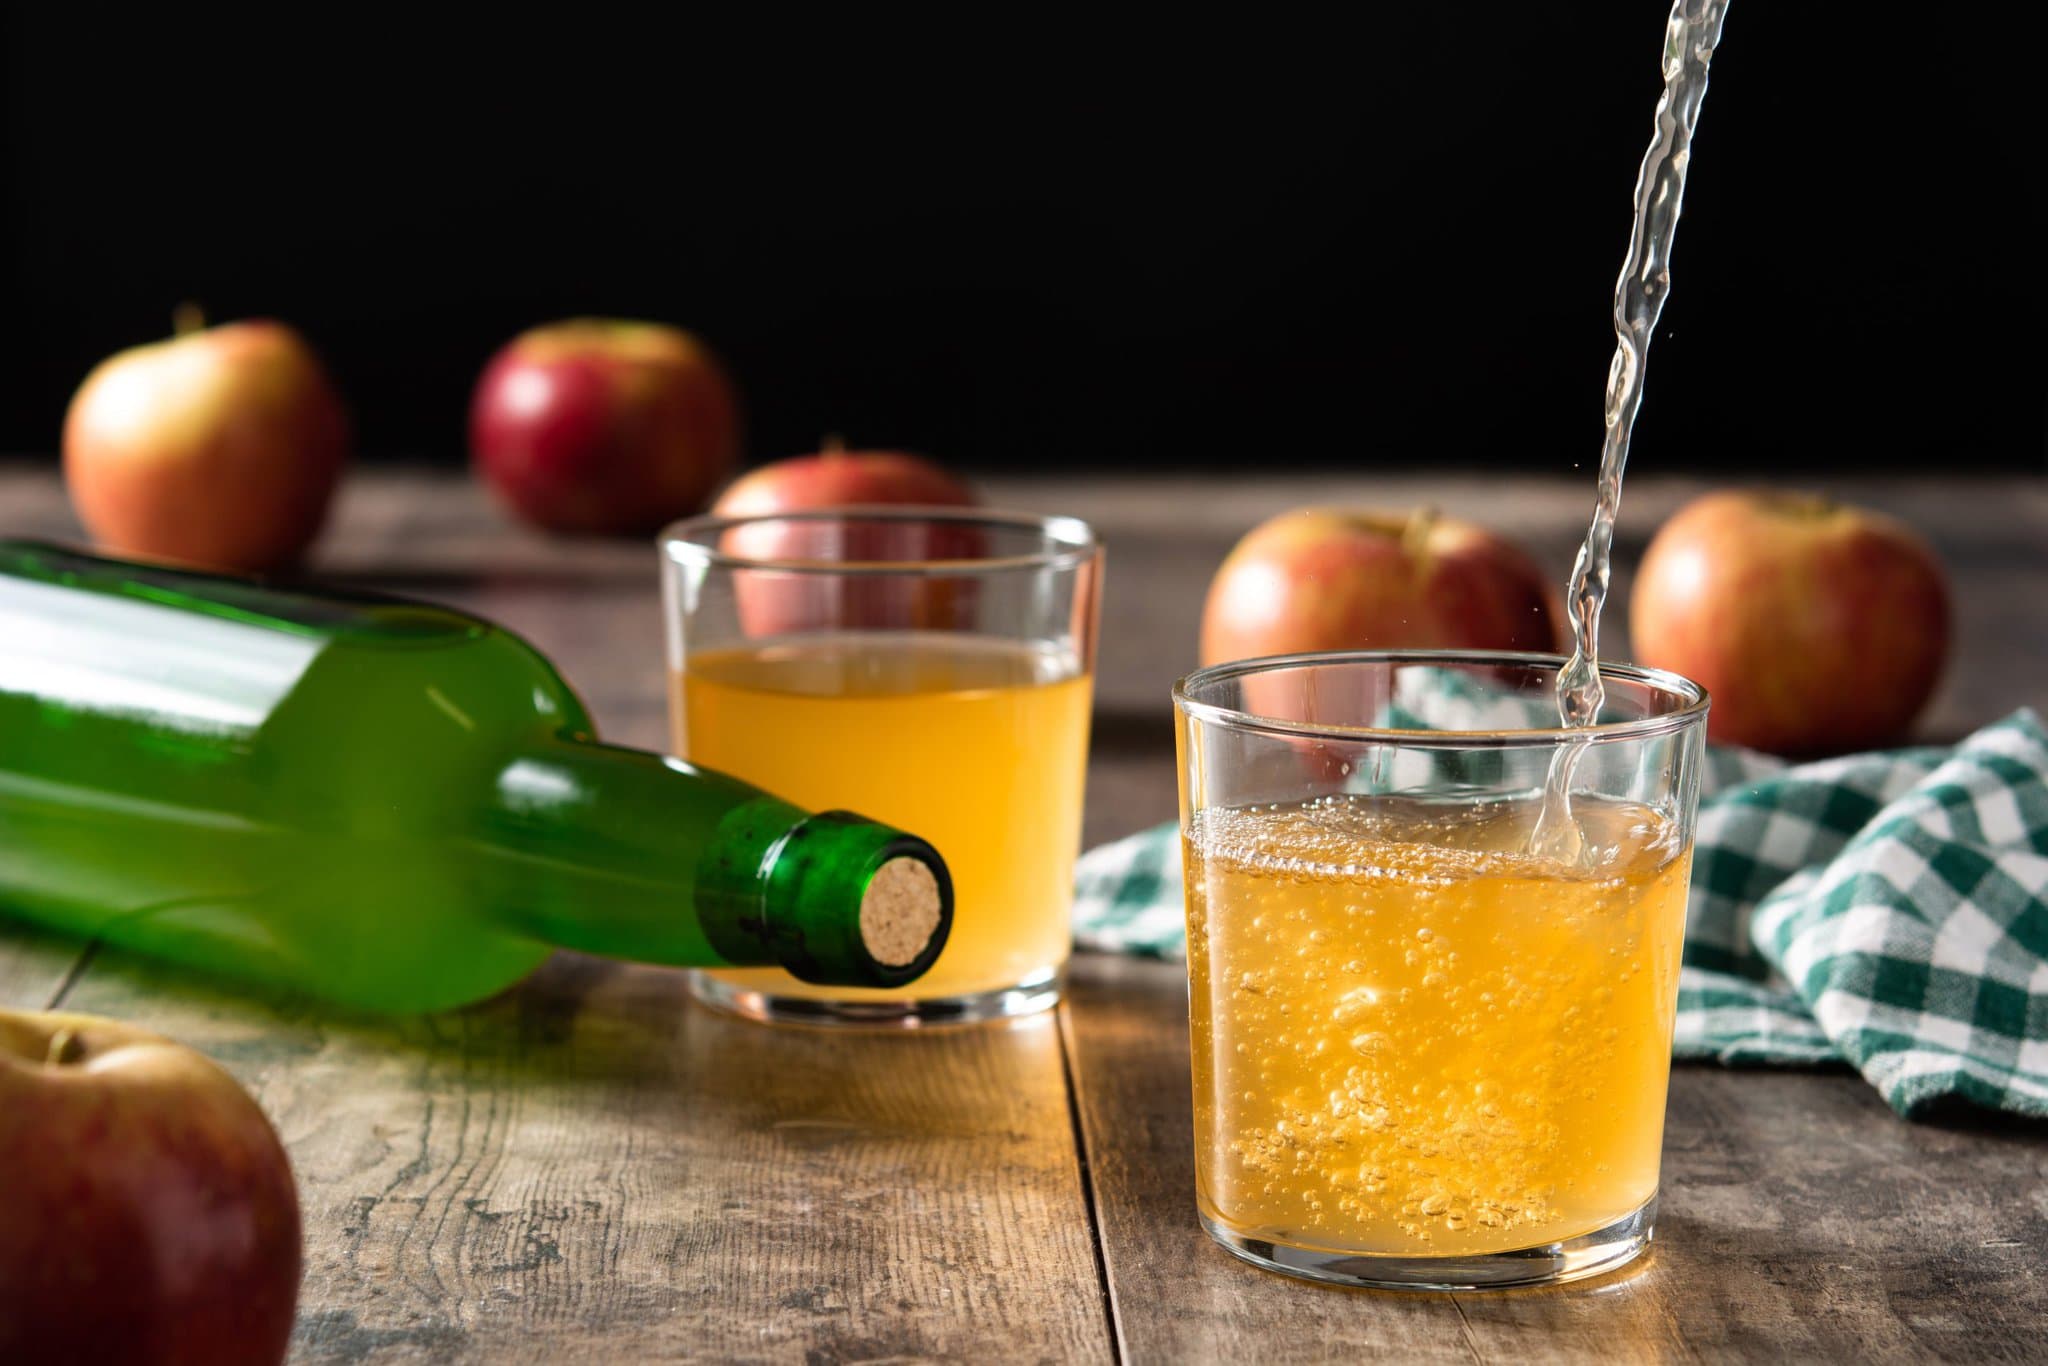 pouring-apple-cider-drink-into-glass-wooden-table